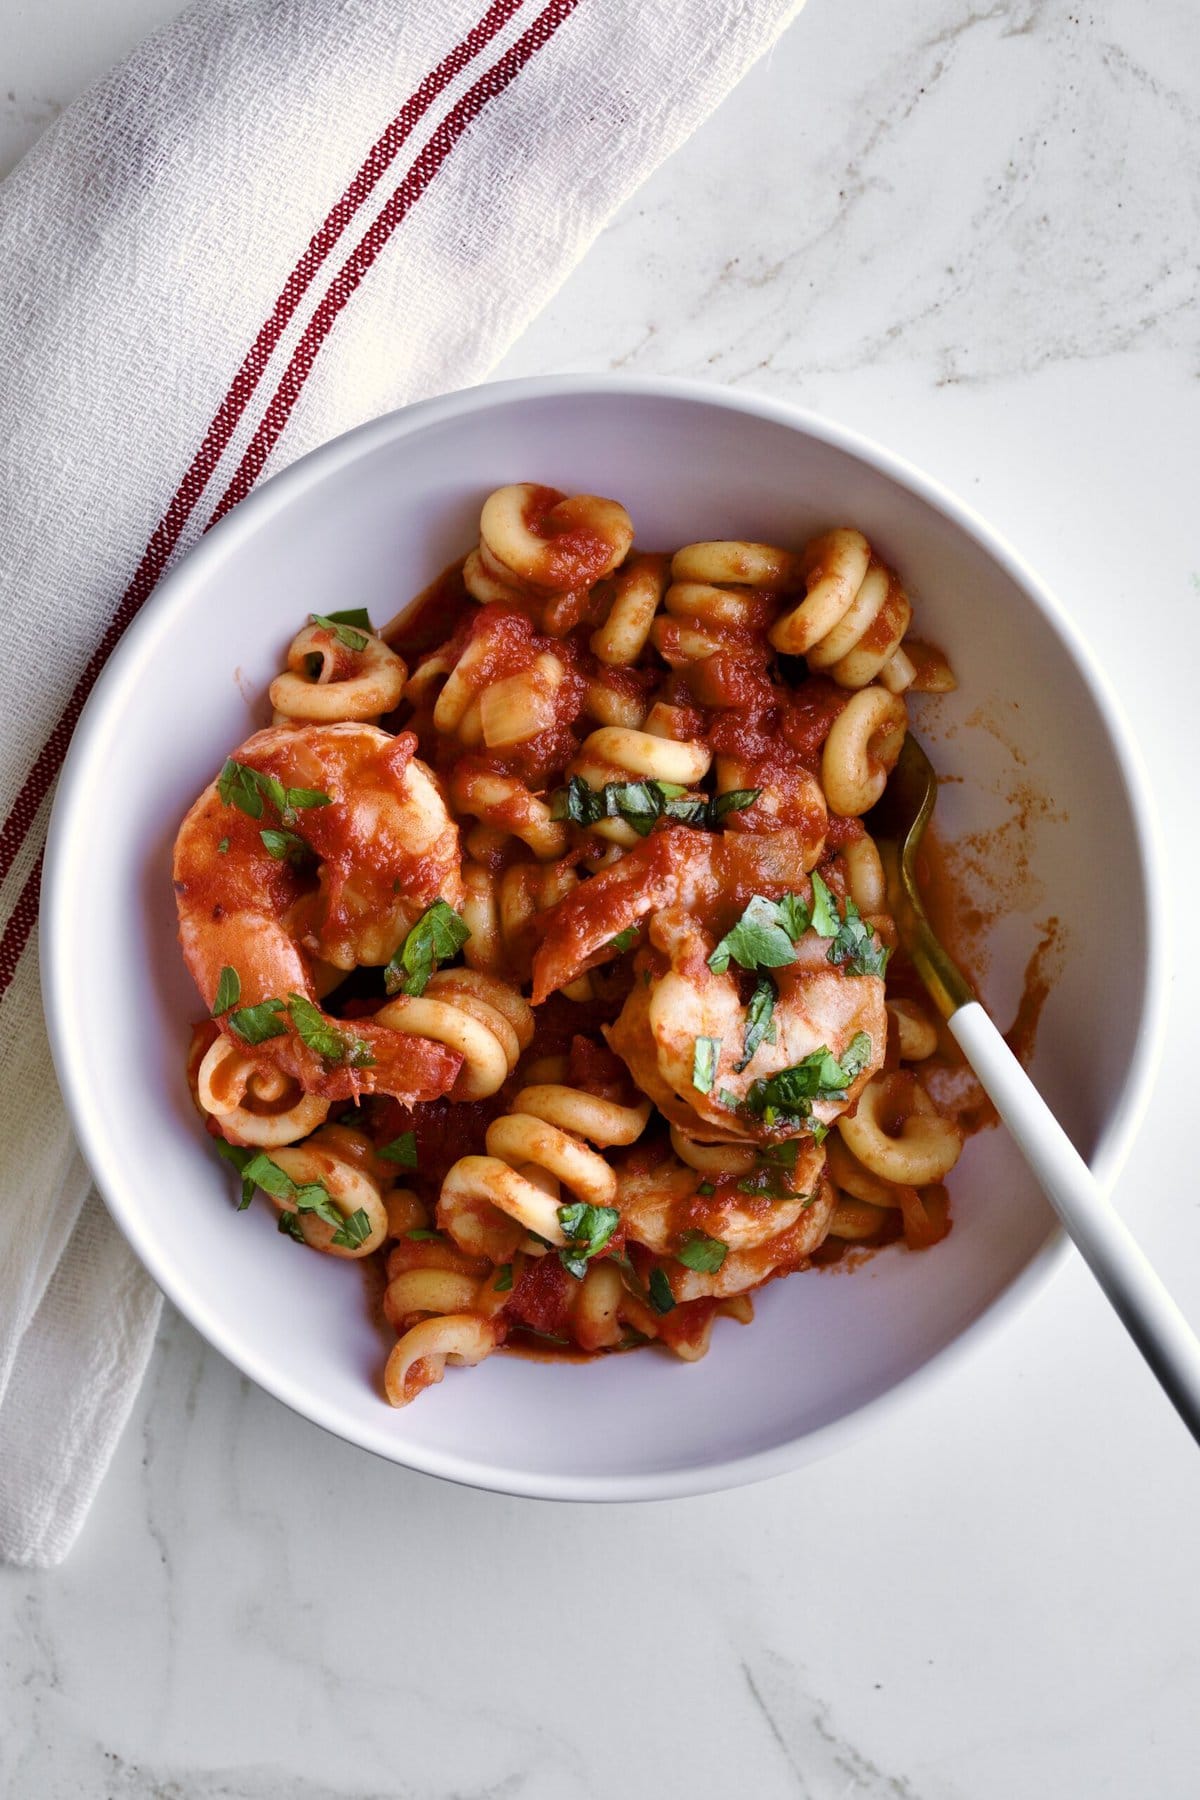 bowl of Trottole Pasta Recipe with Tomato Sauce and Shrimp.